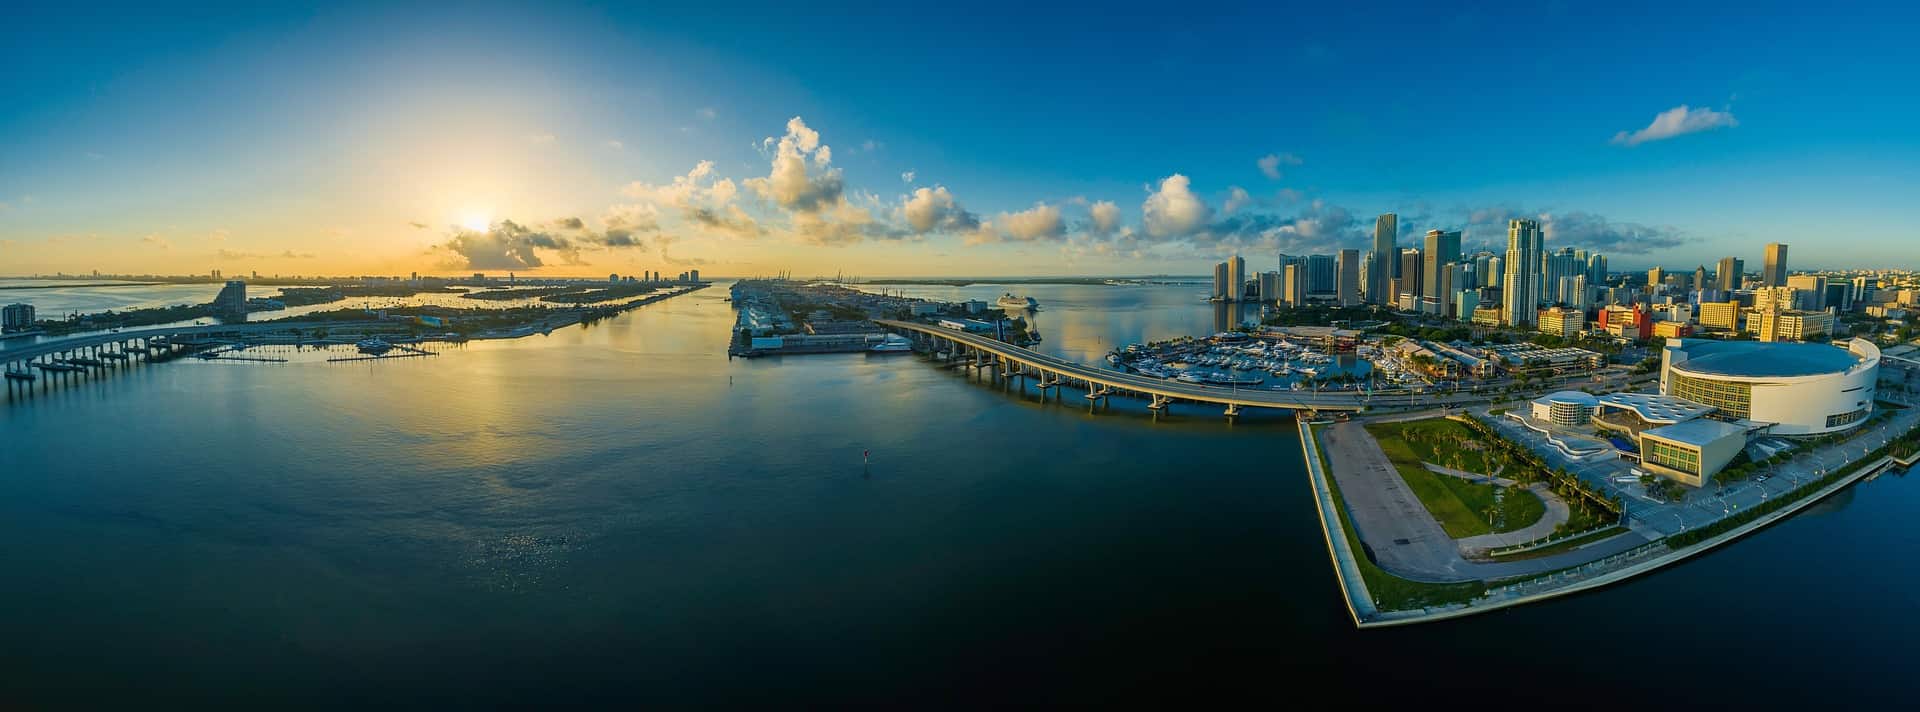 Panorama view of Miami in Florida, USA.